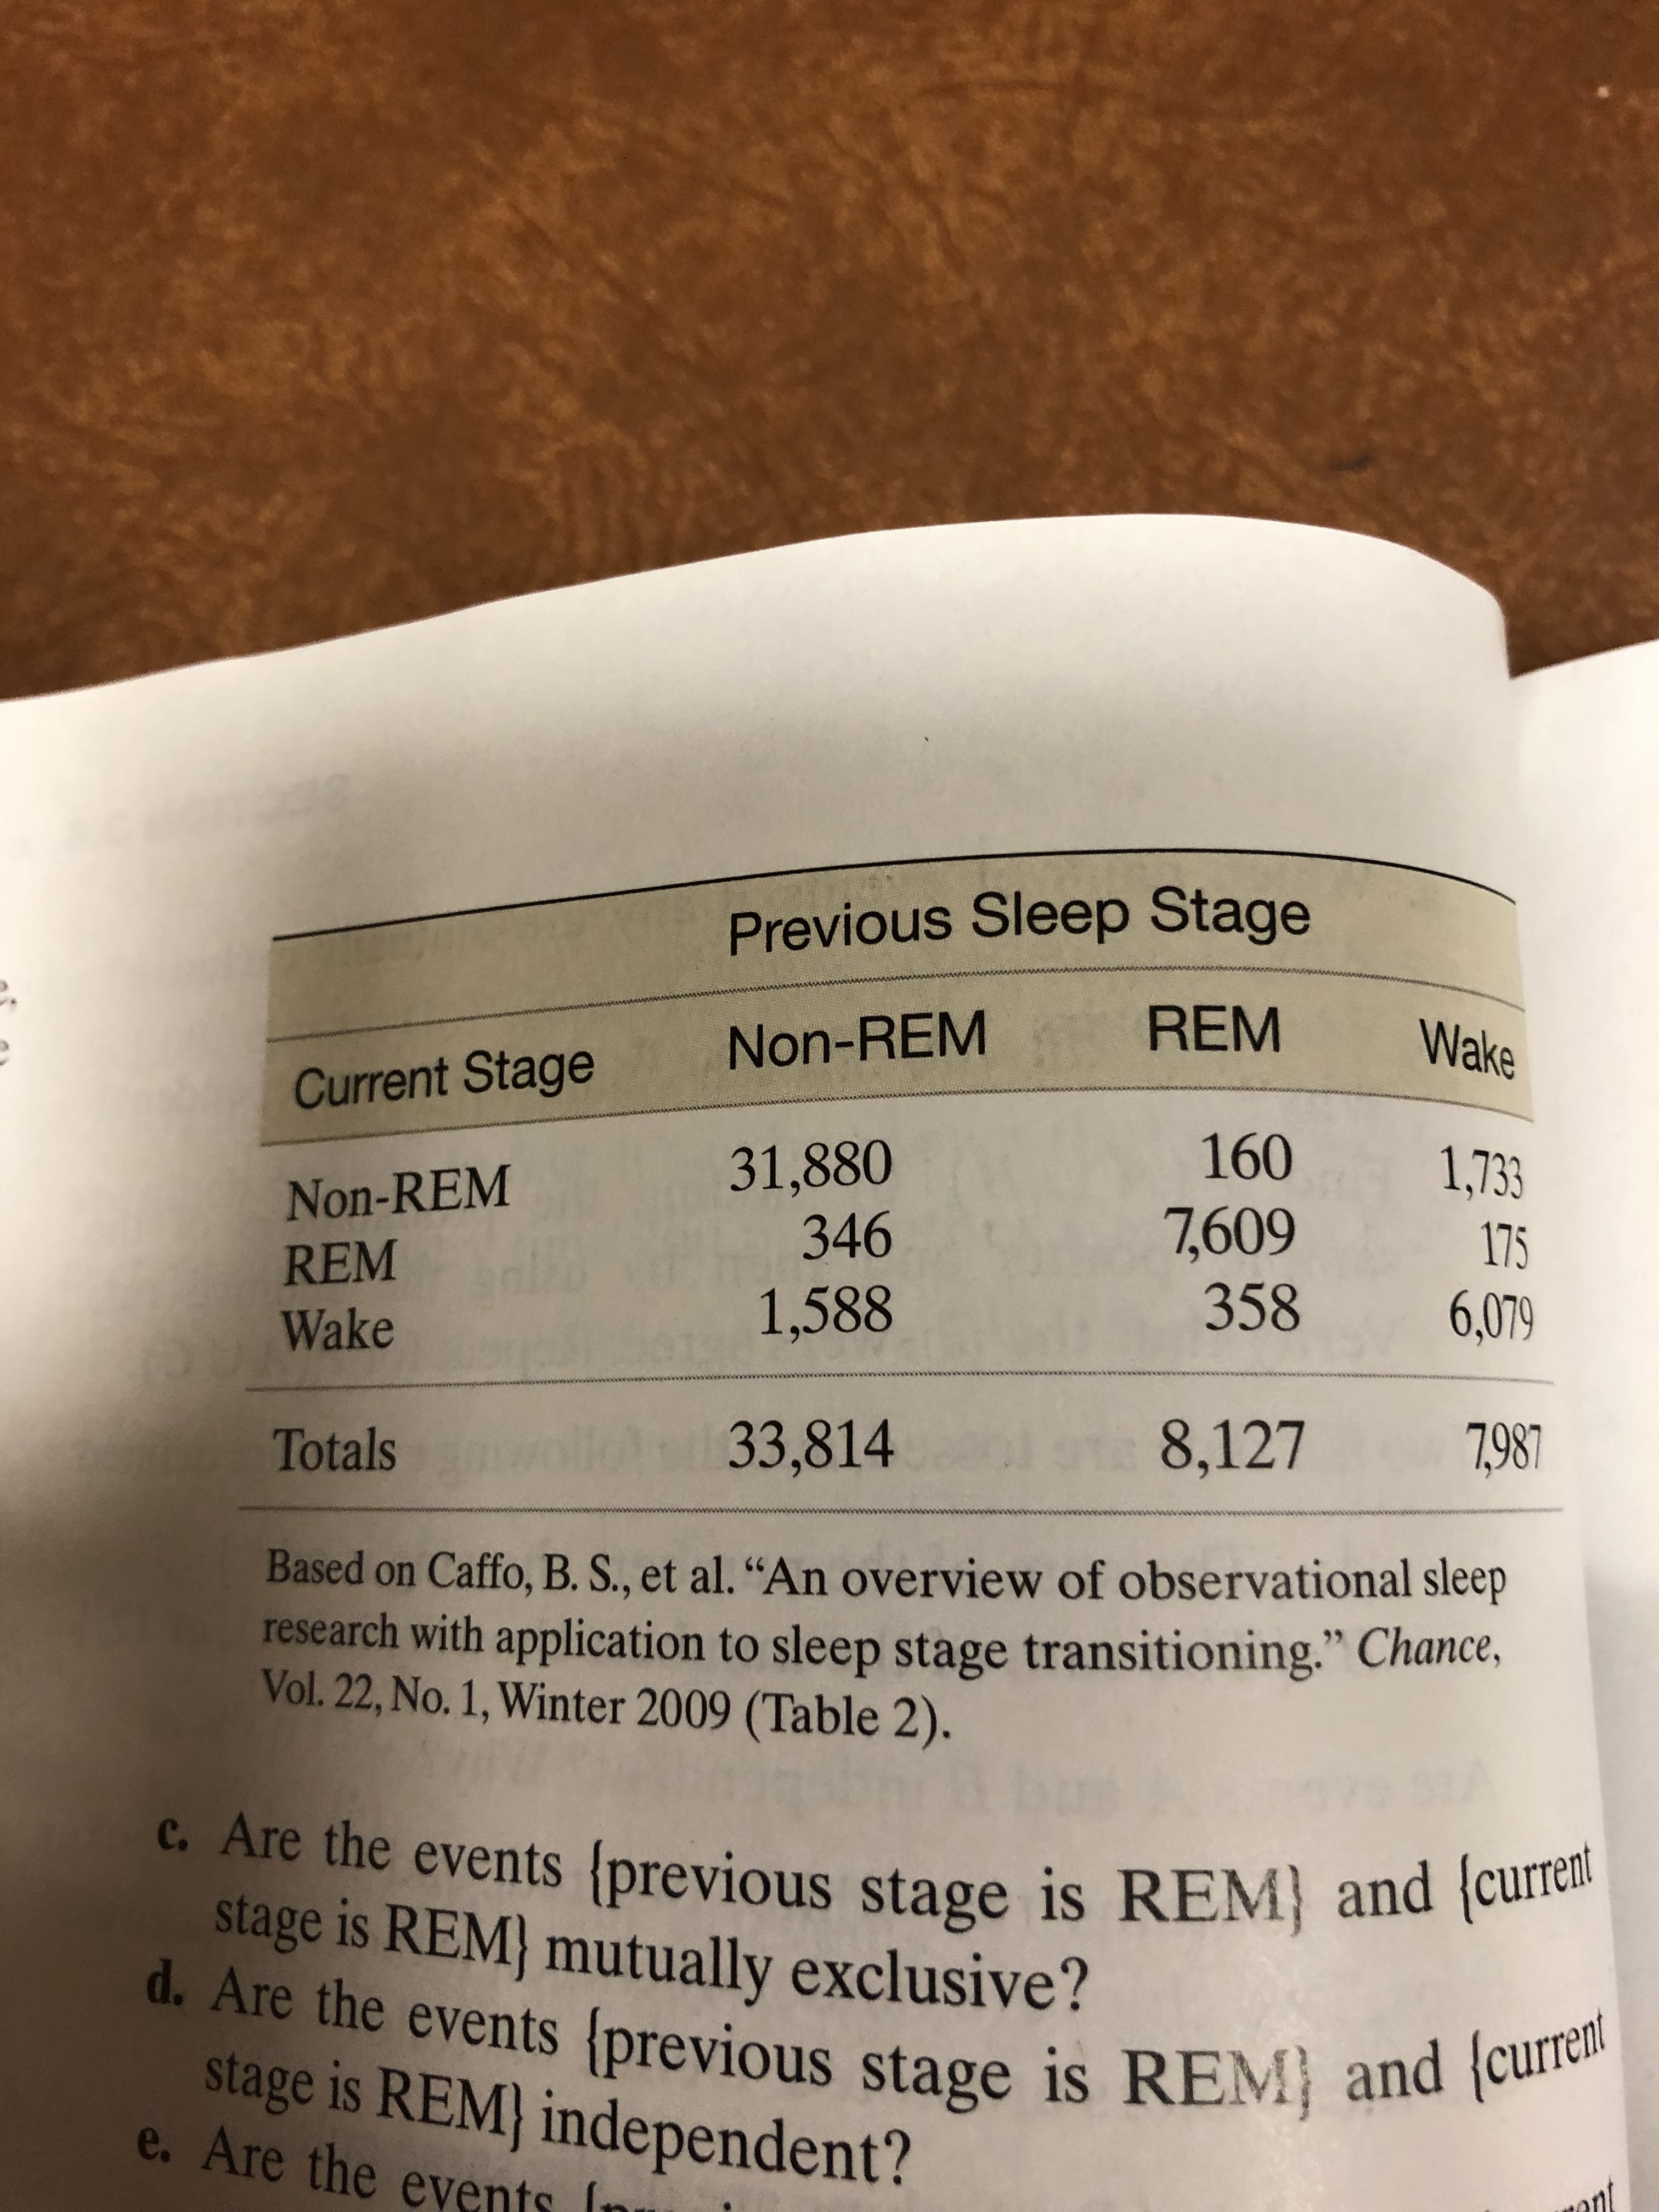 Previous Sleep Stage
Current Stage Non-REM REM
Non-REM
REM
Wake
160 1,733
175
358 6,079
31,880
7,609
346
1,588
33,814
Totals
8,127 987
Based on Caffo, B. S, et al. "An overview of observational sleep
research with application to sleep stage transitioning." Chance,
Vol. 22, No. 1, Winter 2009 (Table 2).
c. Are the events (previous stage 1s
stage is REMI mutually exclusive?
stage is REM independent?
REM) and (curned
, Leurred
d. Are the events (previous stage is REM) an
e. Are the events
